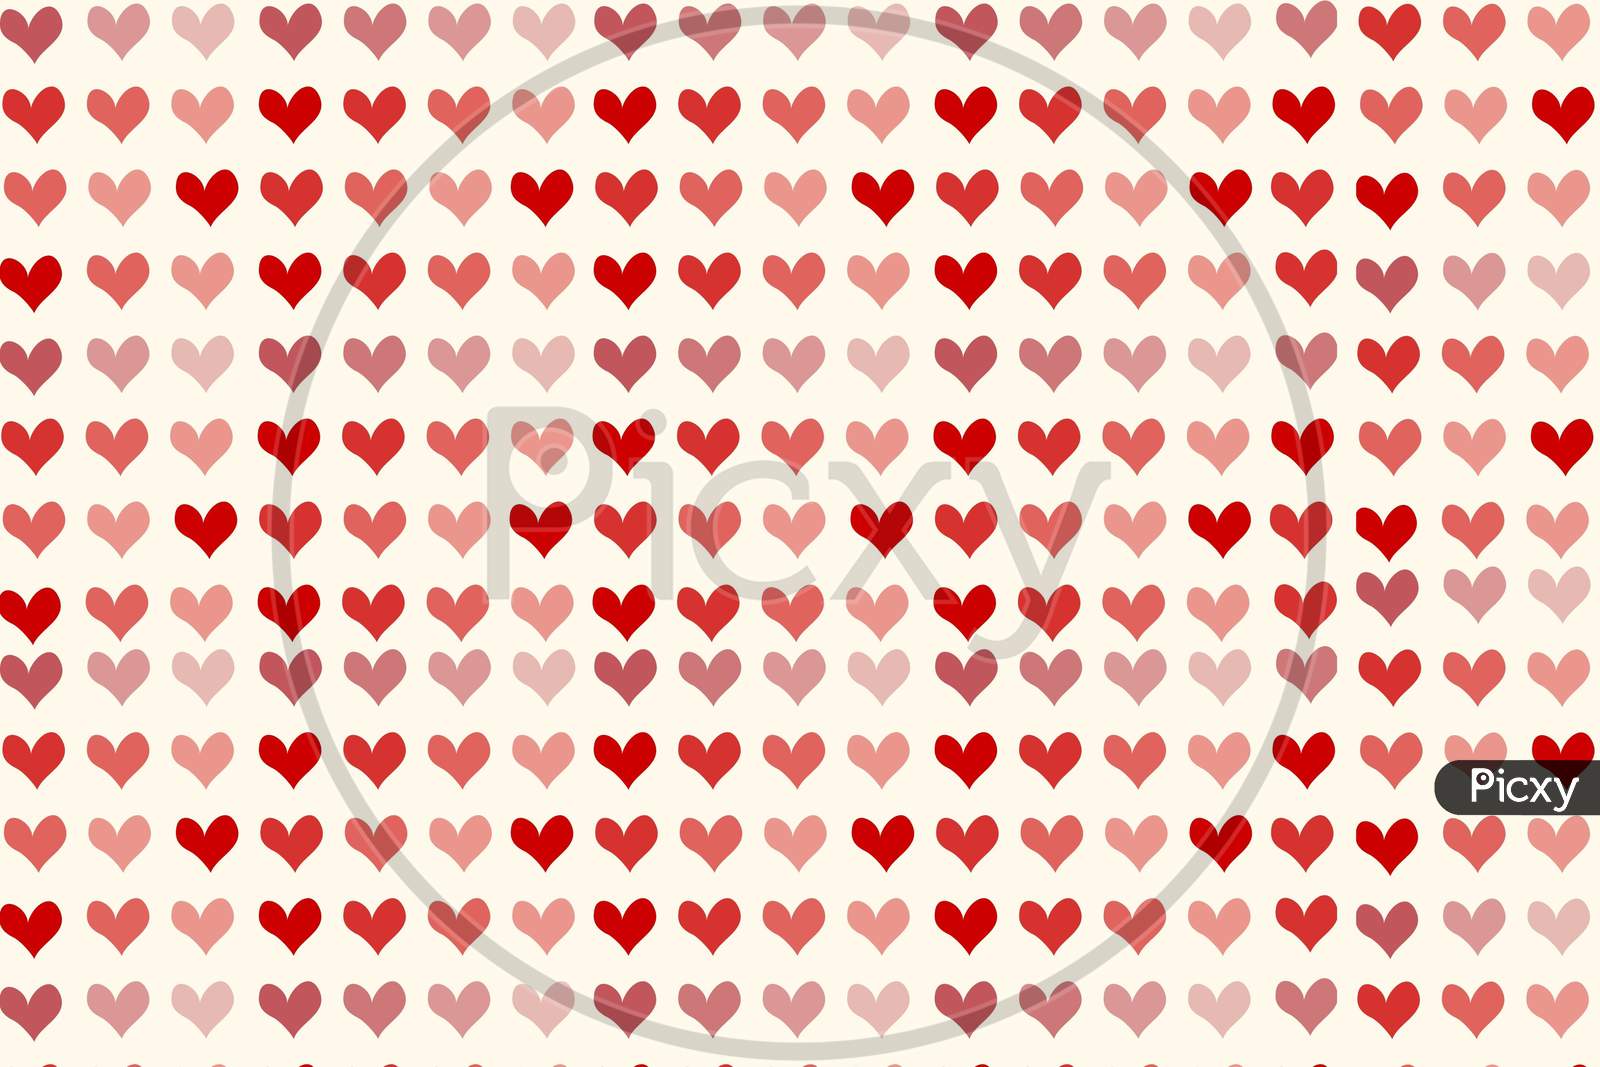 Love ,Likes ,Heart Abstract Or Illustration For Video Background